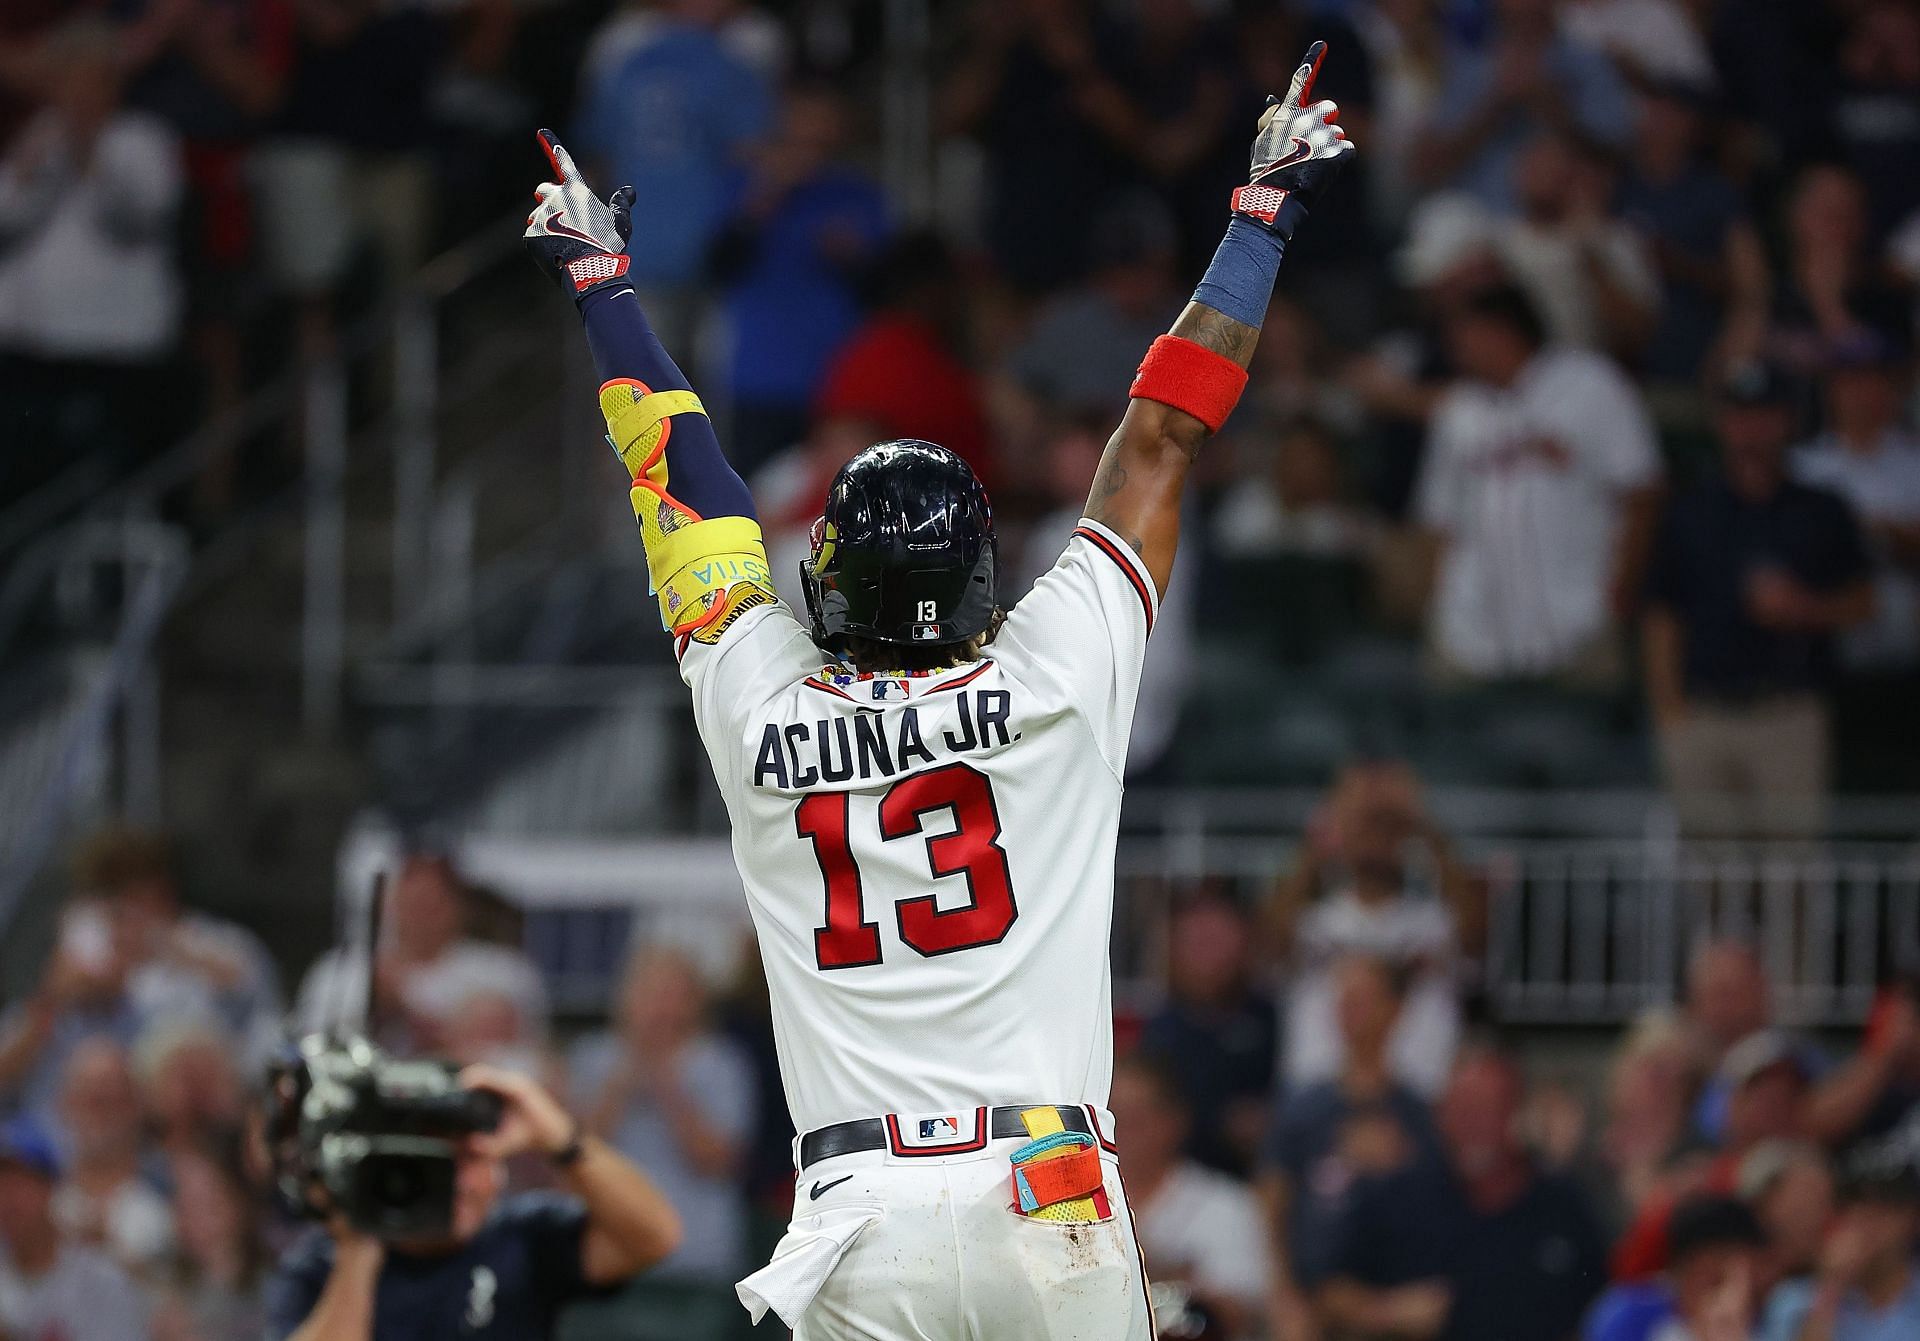 Ronald Acuna Jr. is on pace for 40-40 season 